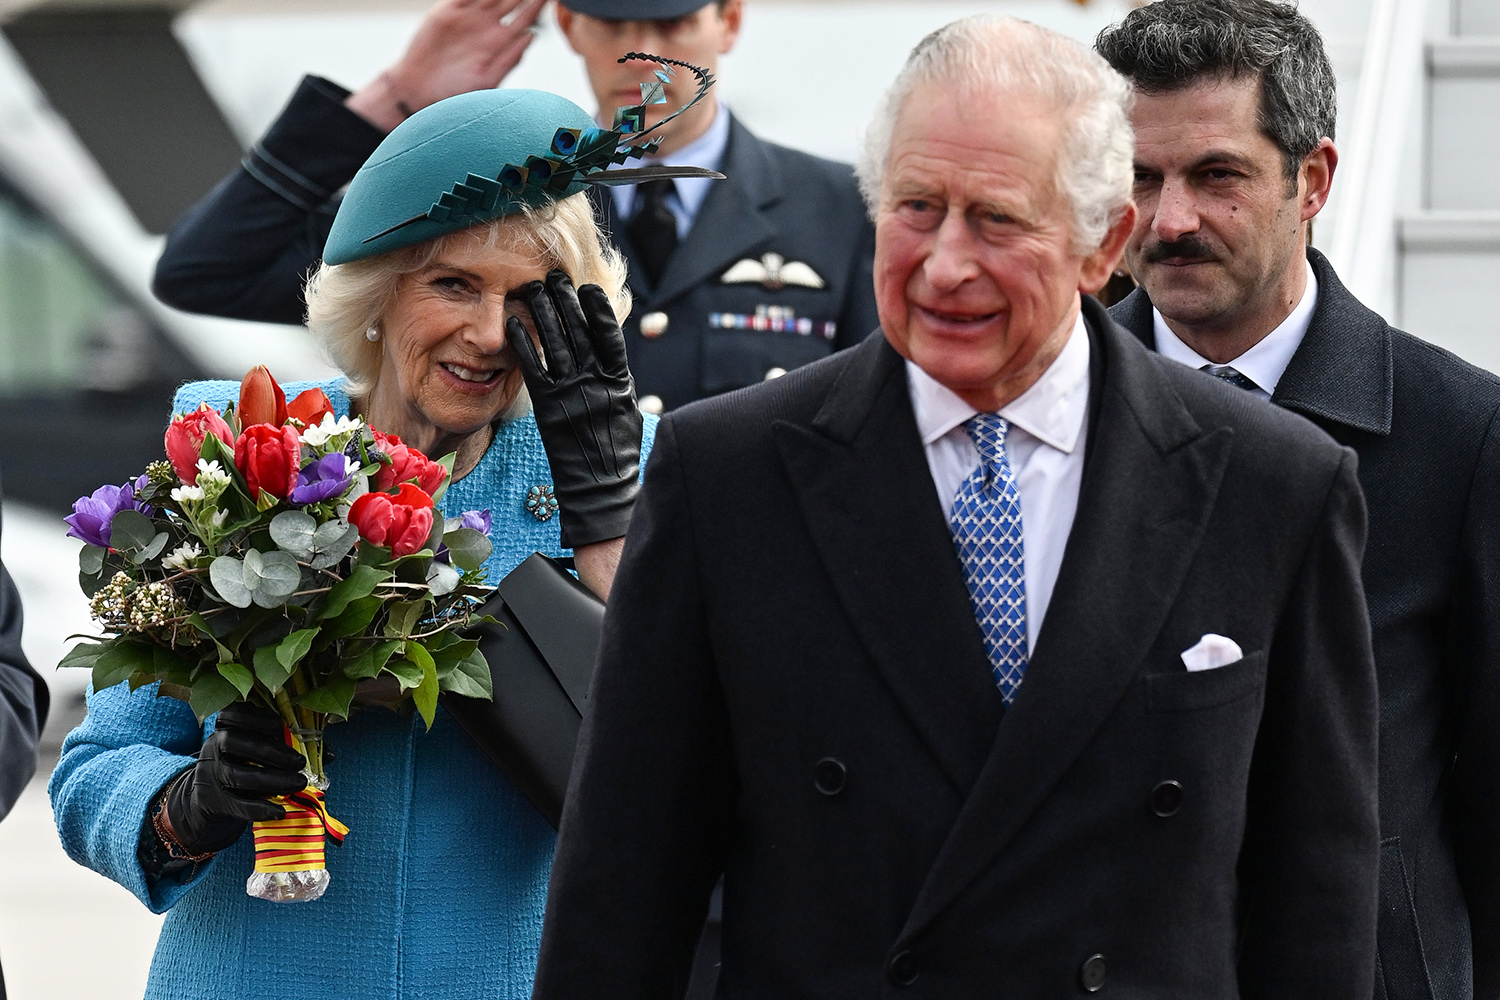 King Charles III and Camilla Queen Consort arrive at Berlin Brandenburg Airport